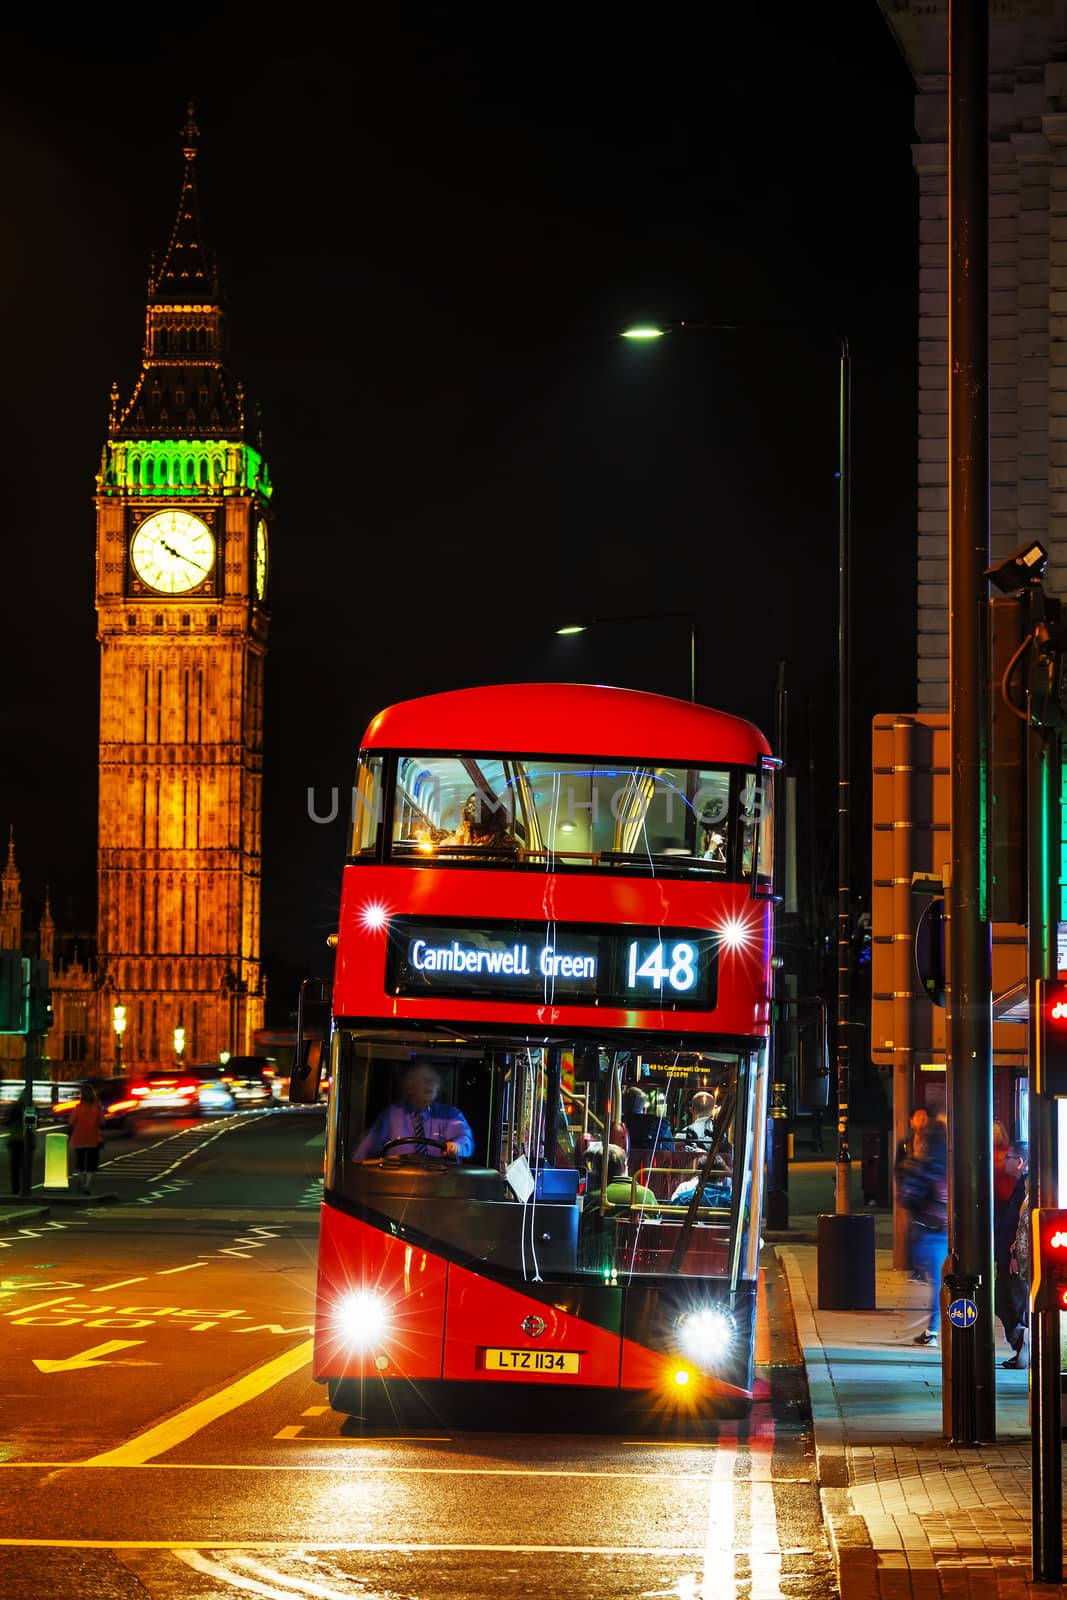 LONDON - APRIL 14: Iconic red double decker bus on April 14, 2015 in London, UK. The London Bus is one of London's principal icons, the archetypal red rear-entrance Routemaster recognised worldwide.